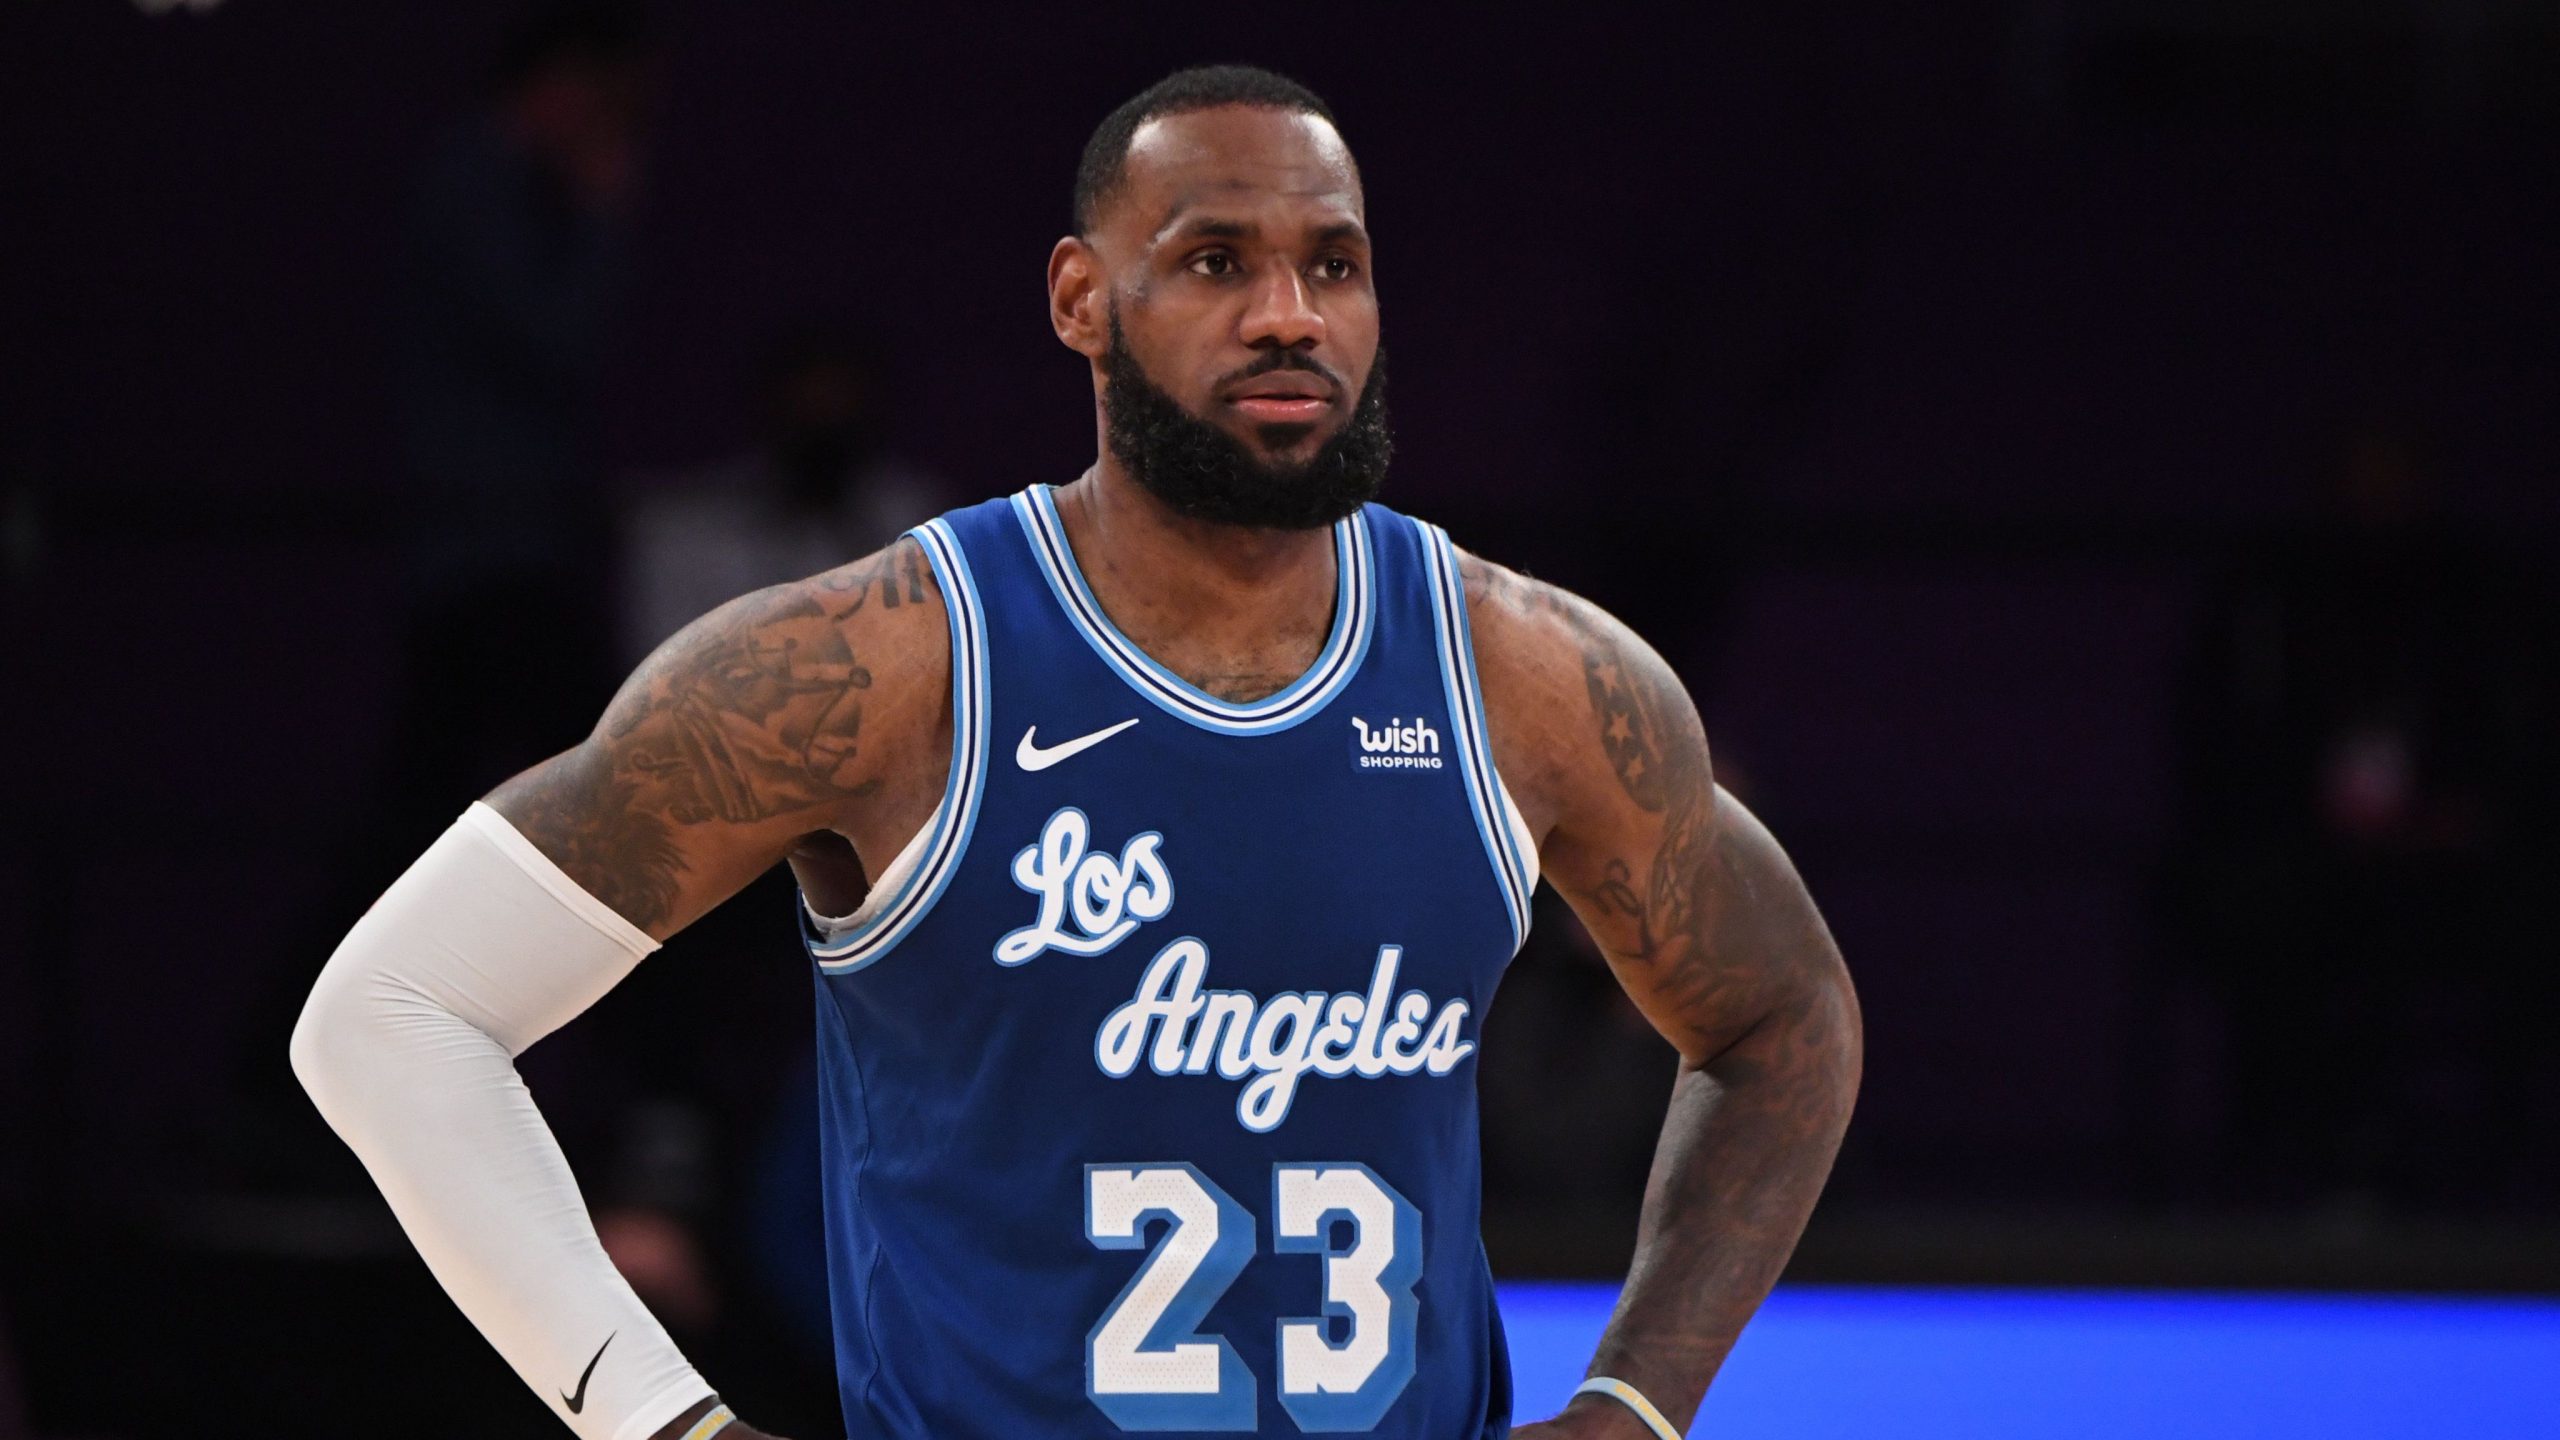 NBA All-Stars 2021: Who will come on top in the clash of titans